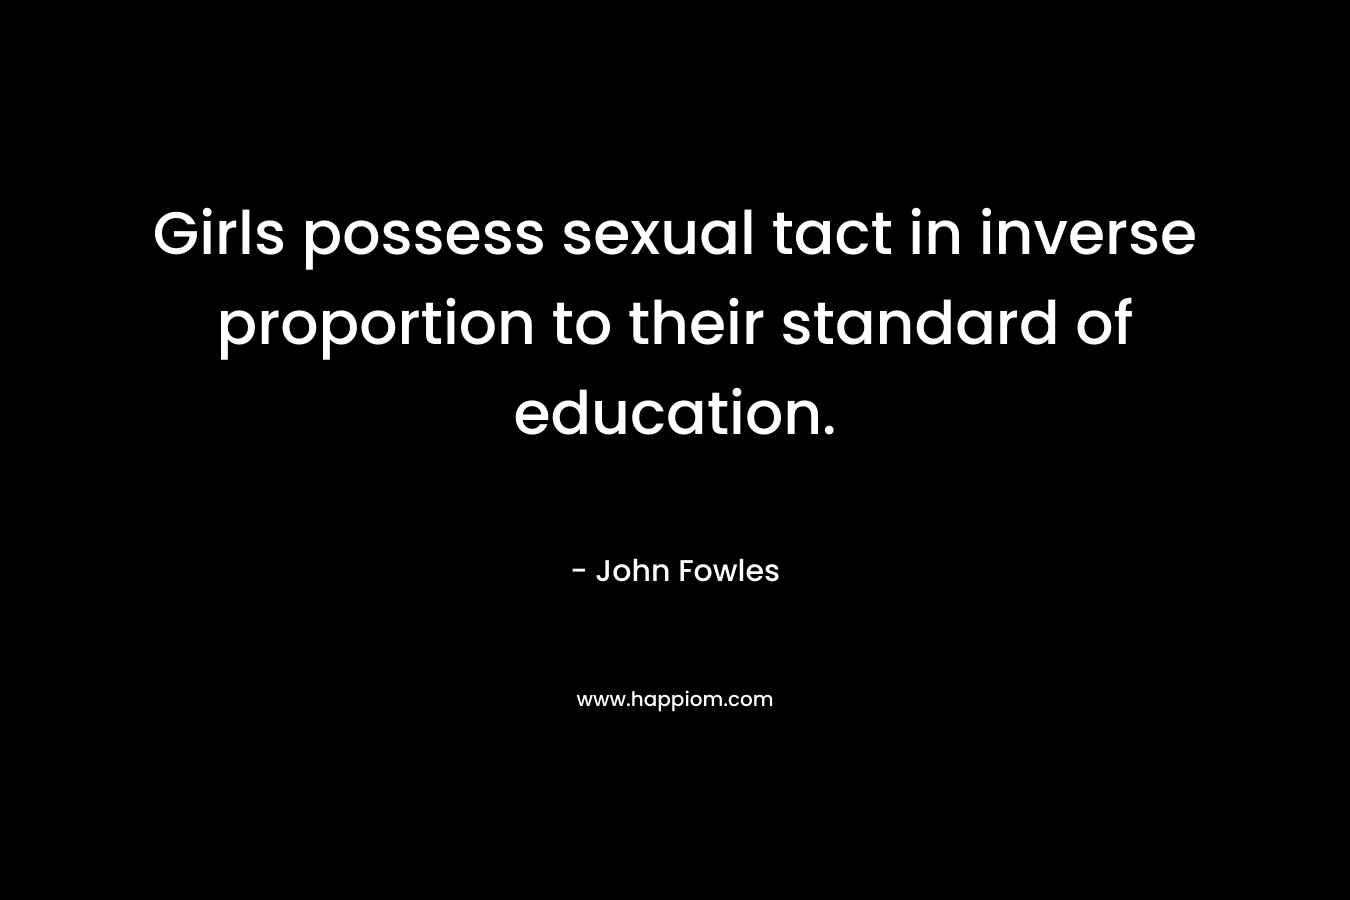 Girls possess sexual tact in inverse proportion to their standard of education.